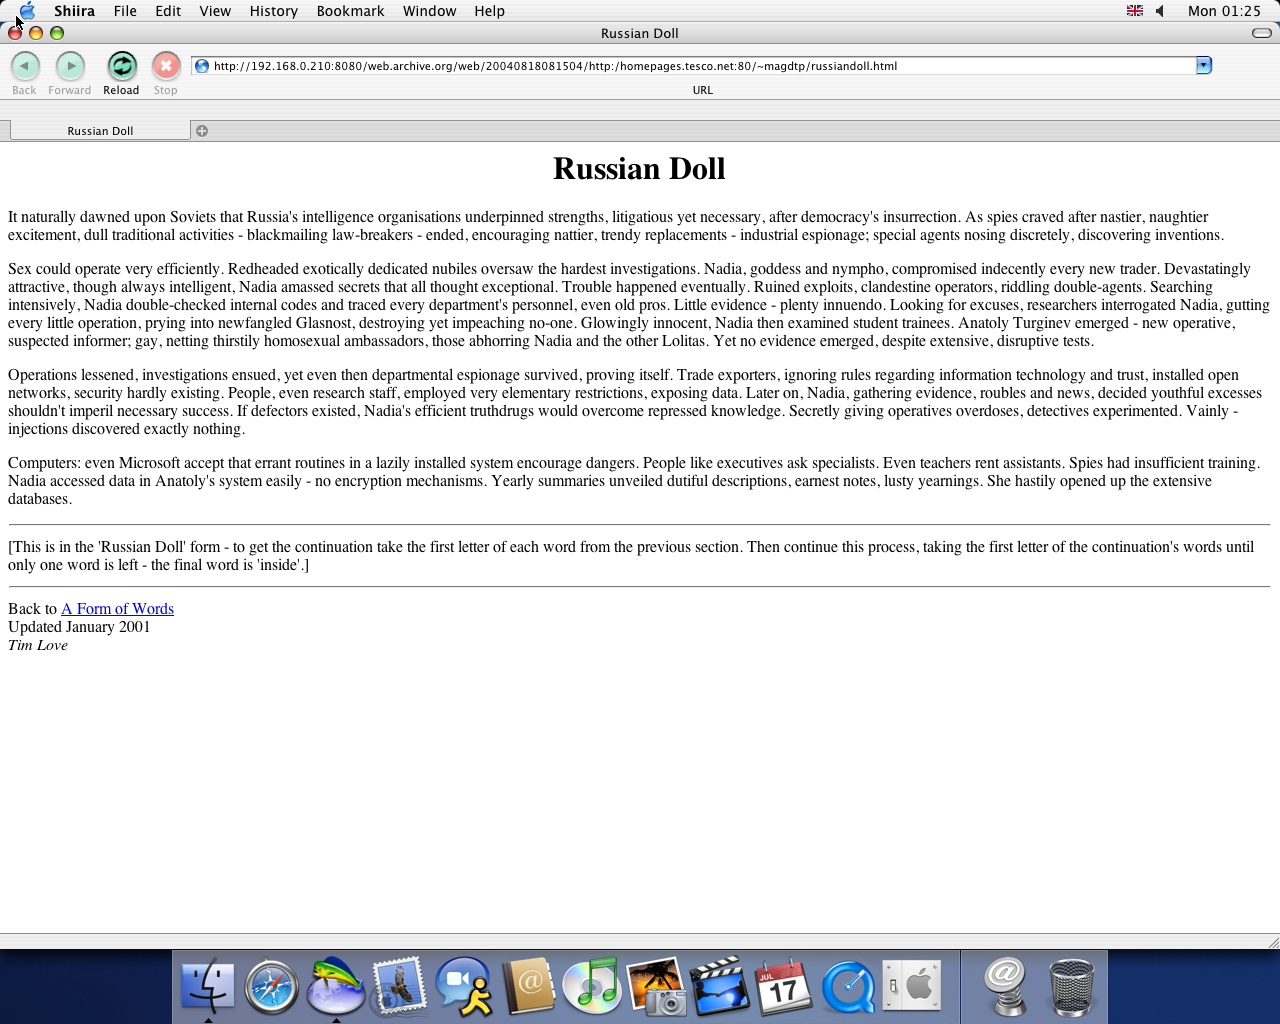 OS X 10.3 PPC with Shiira 0.9.1 displaying a page from Tesco.net User Homepages archived at August 18, 2004 at 08:15:04